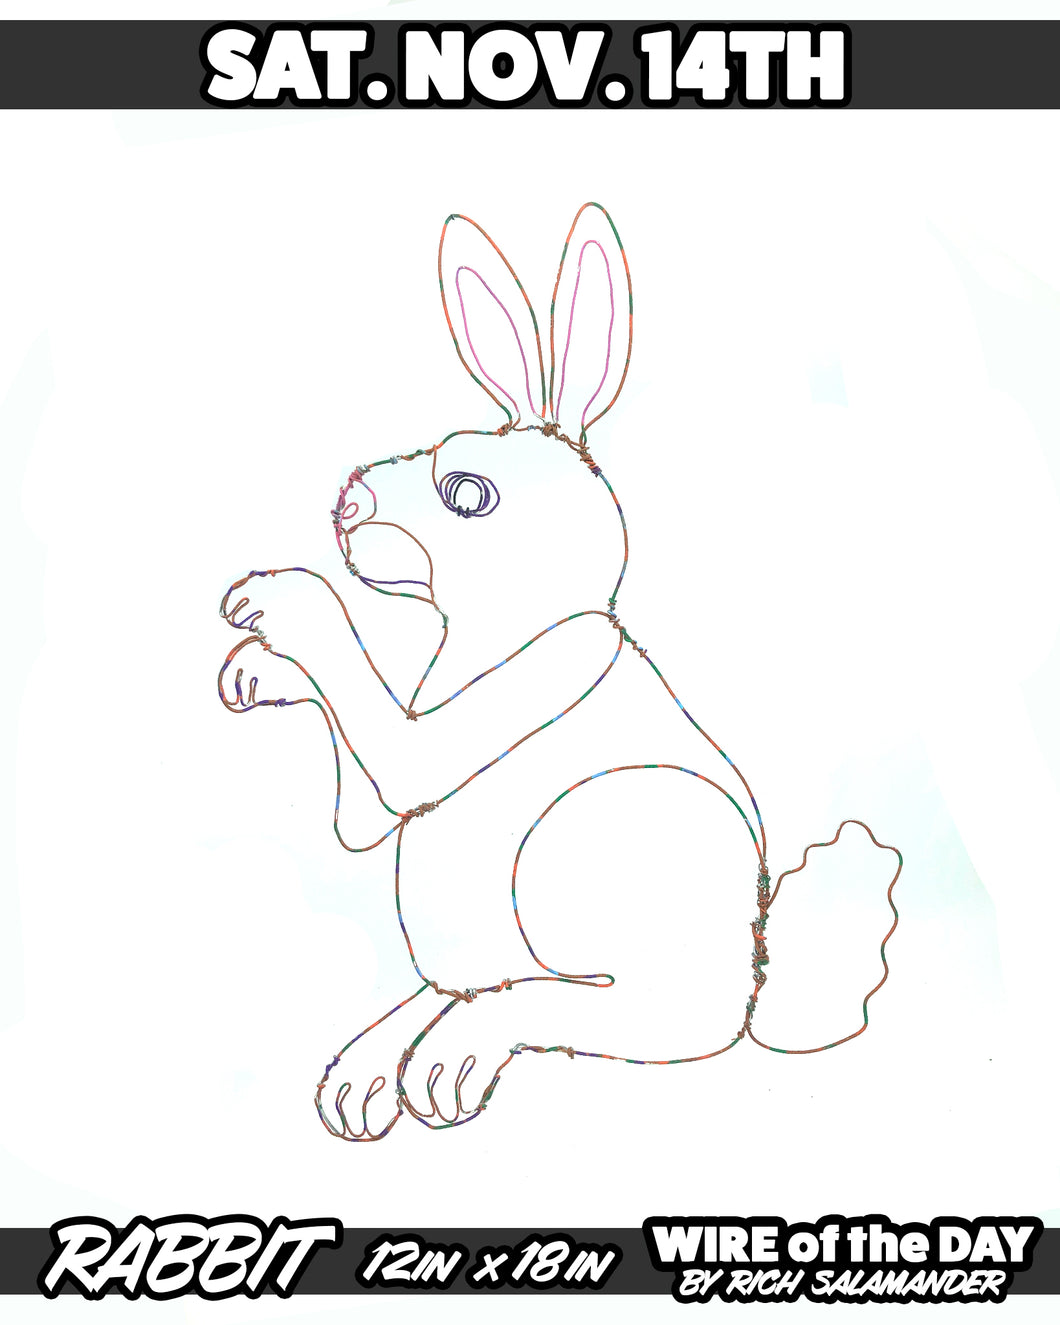 WIRE of the DAY RABBIT